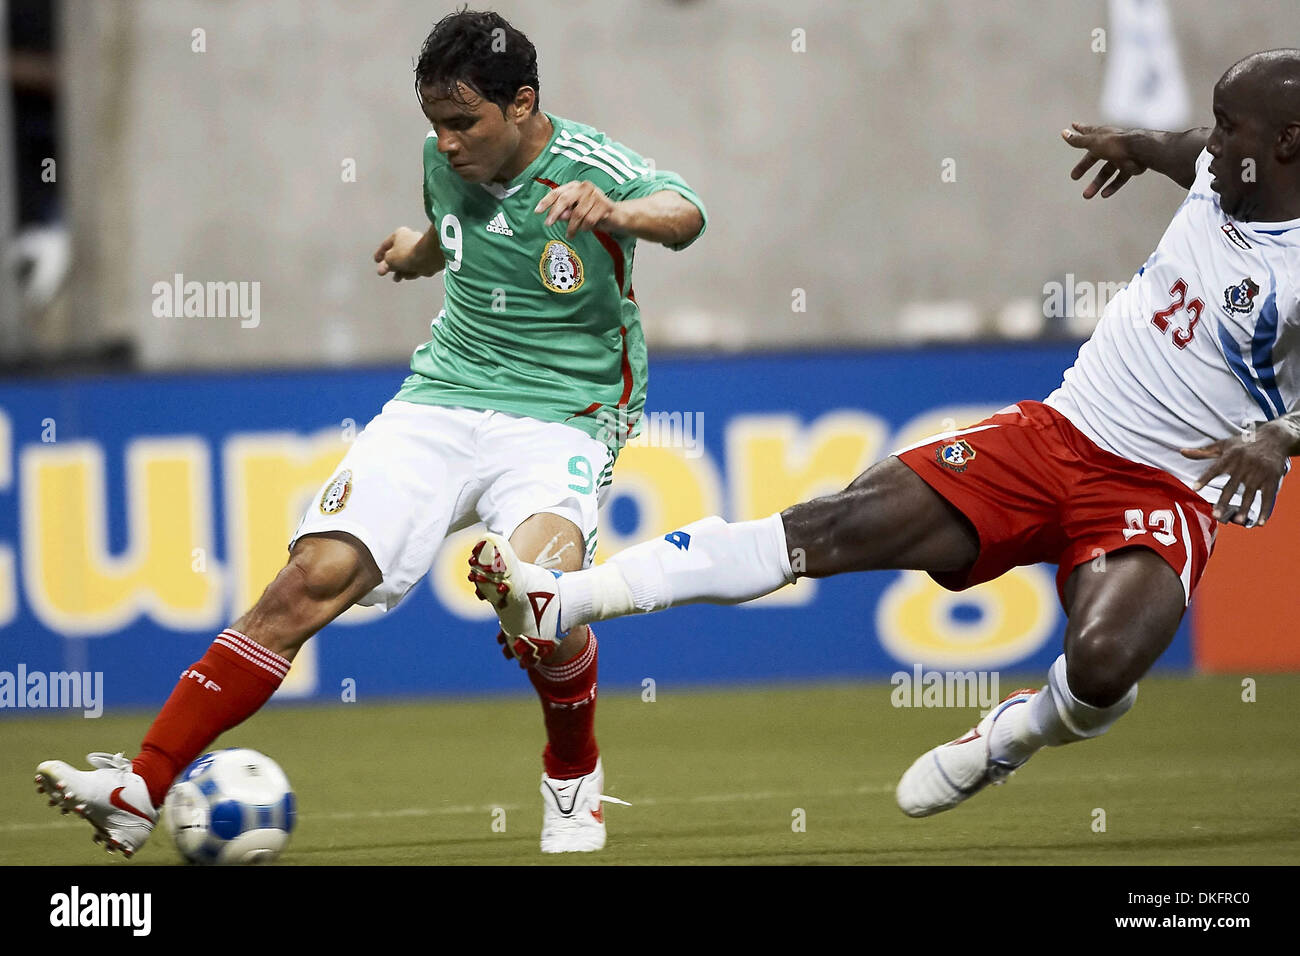 Jul 10, 2009 - Houston, Texas, USA - OMAR BRAVO (#9) of Mexico attempts to retain control of the ball as FELIPE BALOY (#23) of Panama dives in on a tackle.  Panama and Mexico tied 1-1 at Reliant Stadium. (Credit Image: © Diana Porter/Southcreek Global/ZUMA Press) Stock Photo